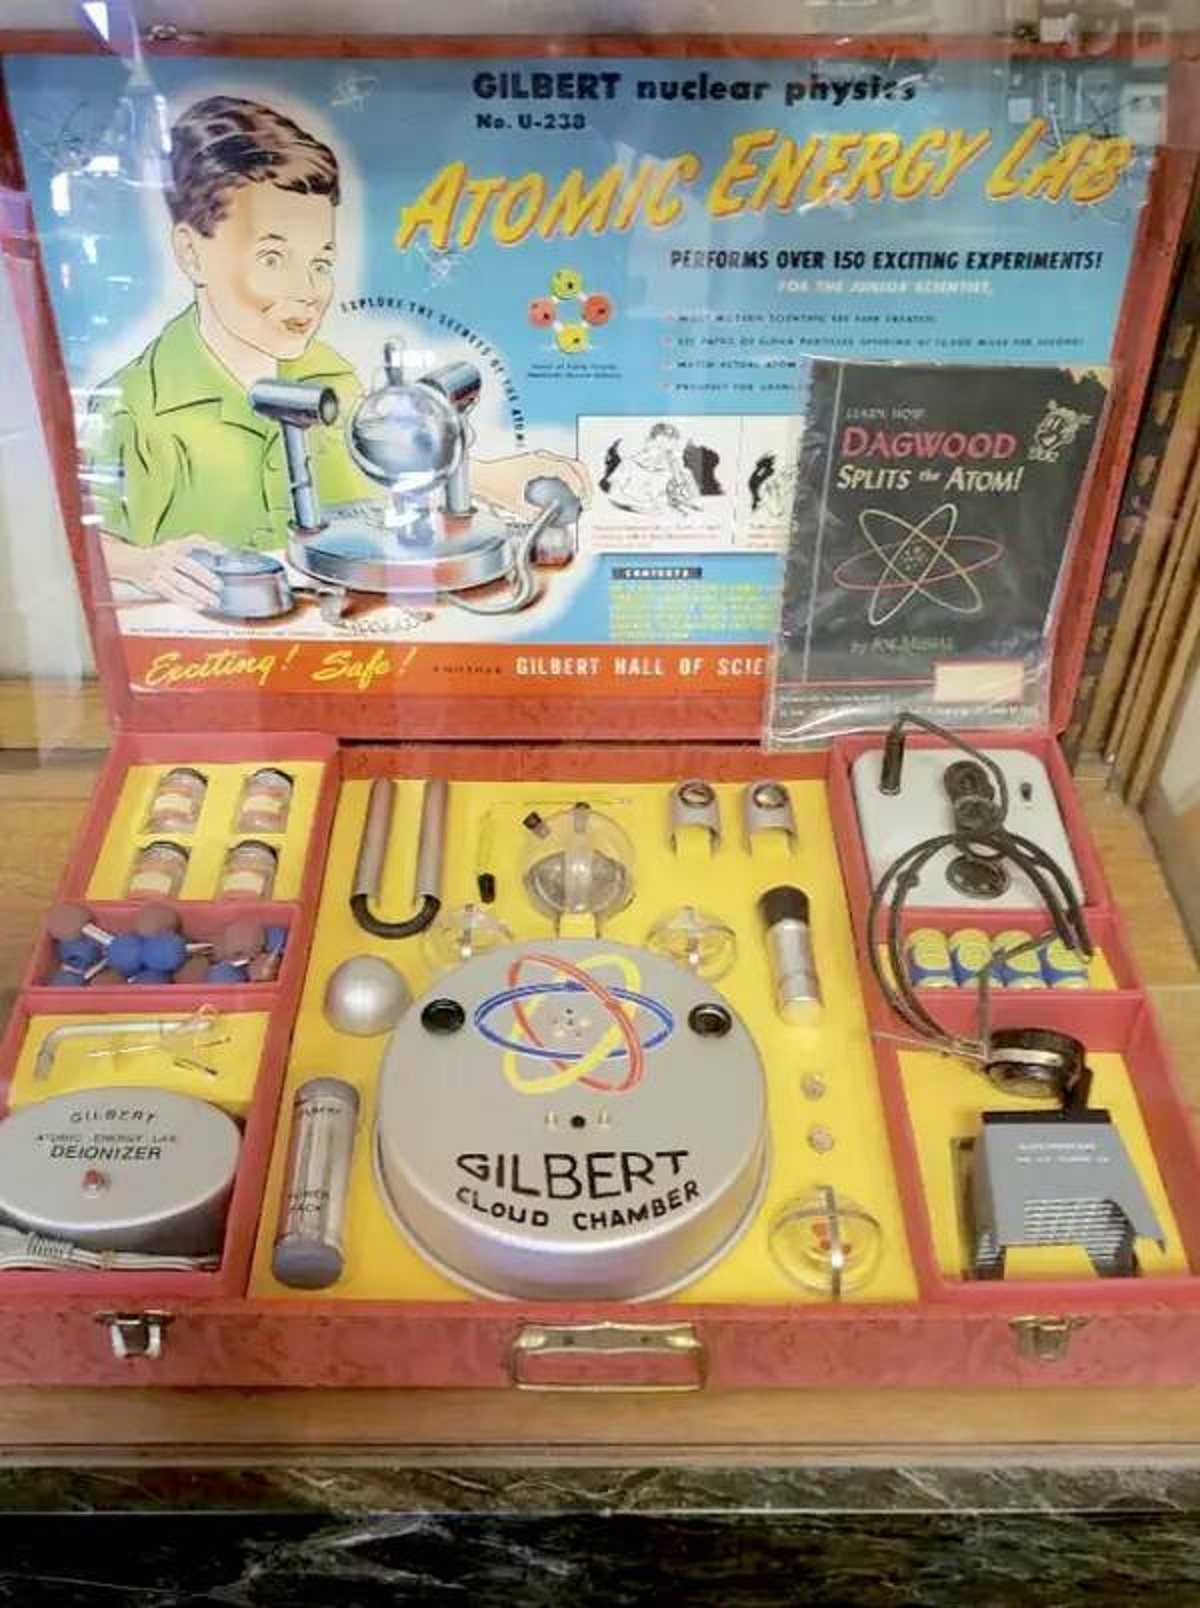 Here's an atomic energy kit for kids from back in the '50s.